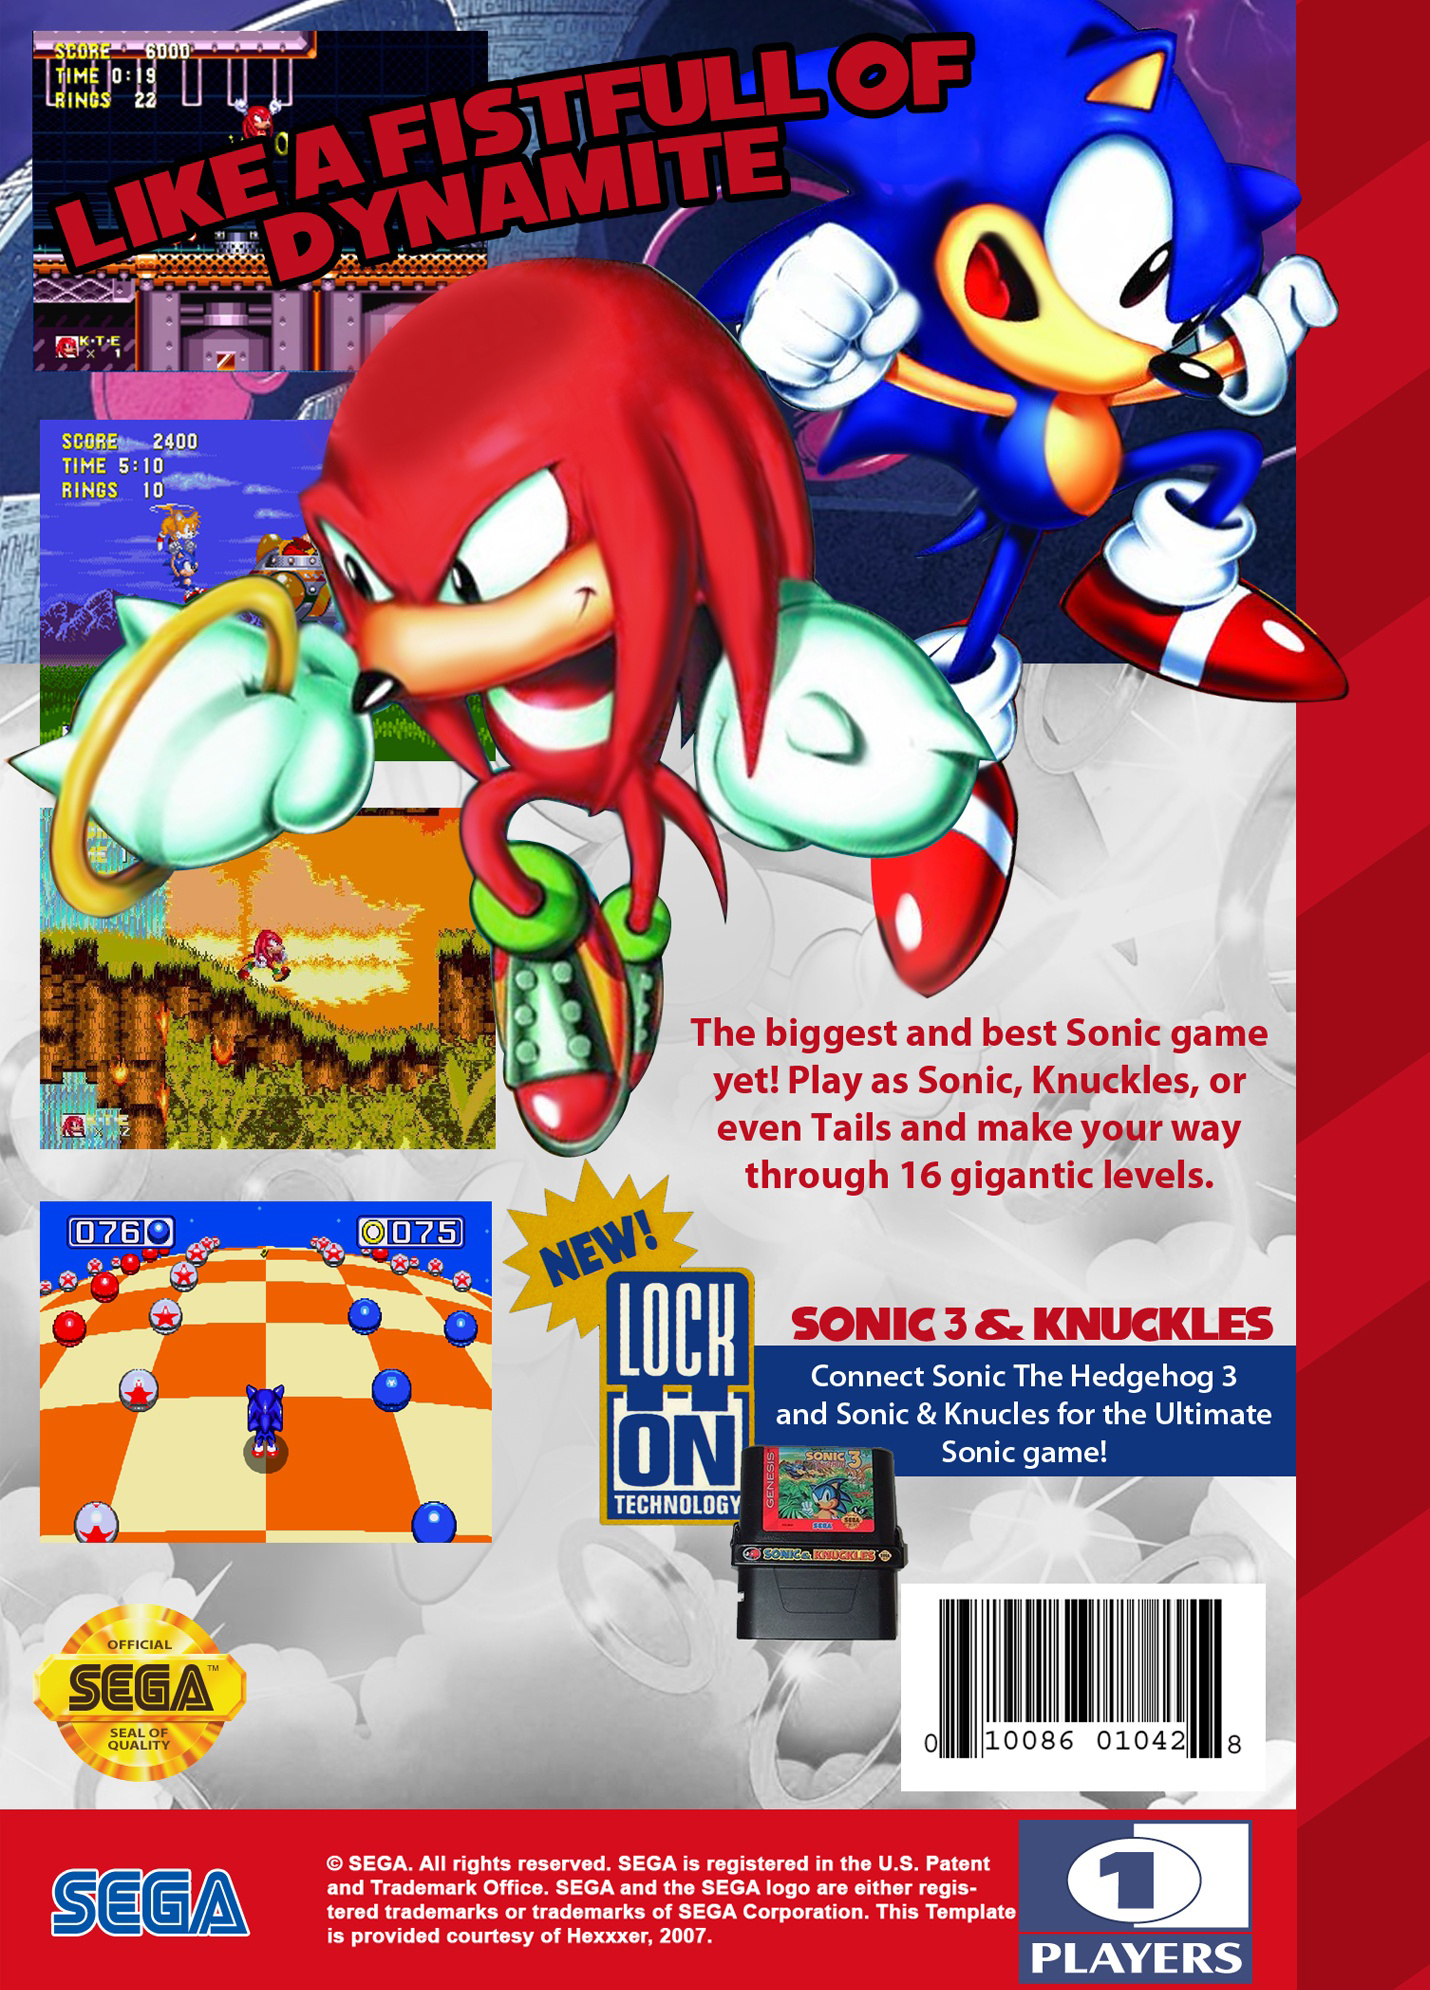 Sonic the Hedgehog 3 & Knuckles Picture - Image Abyss